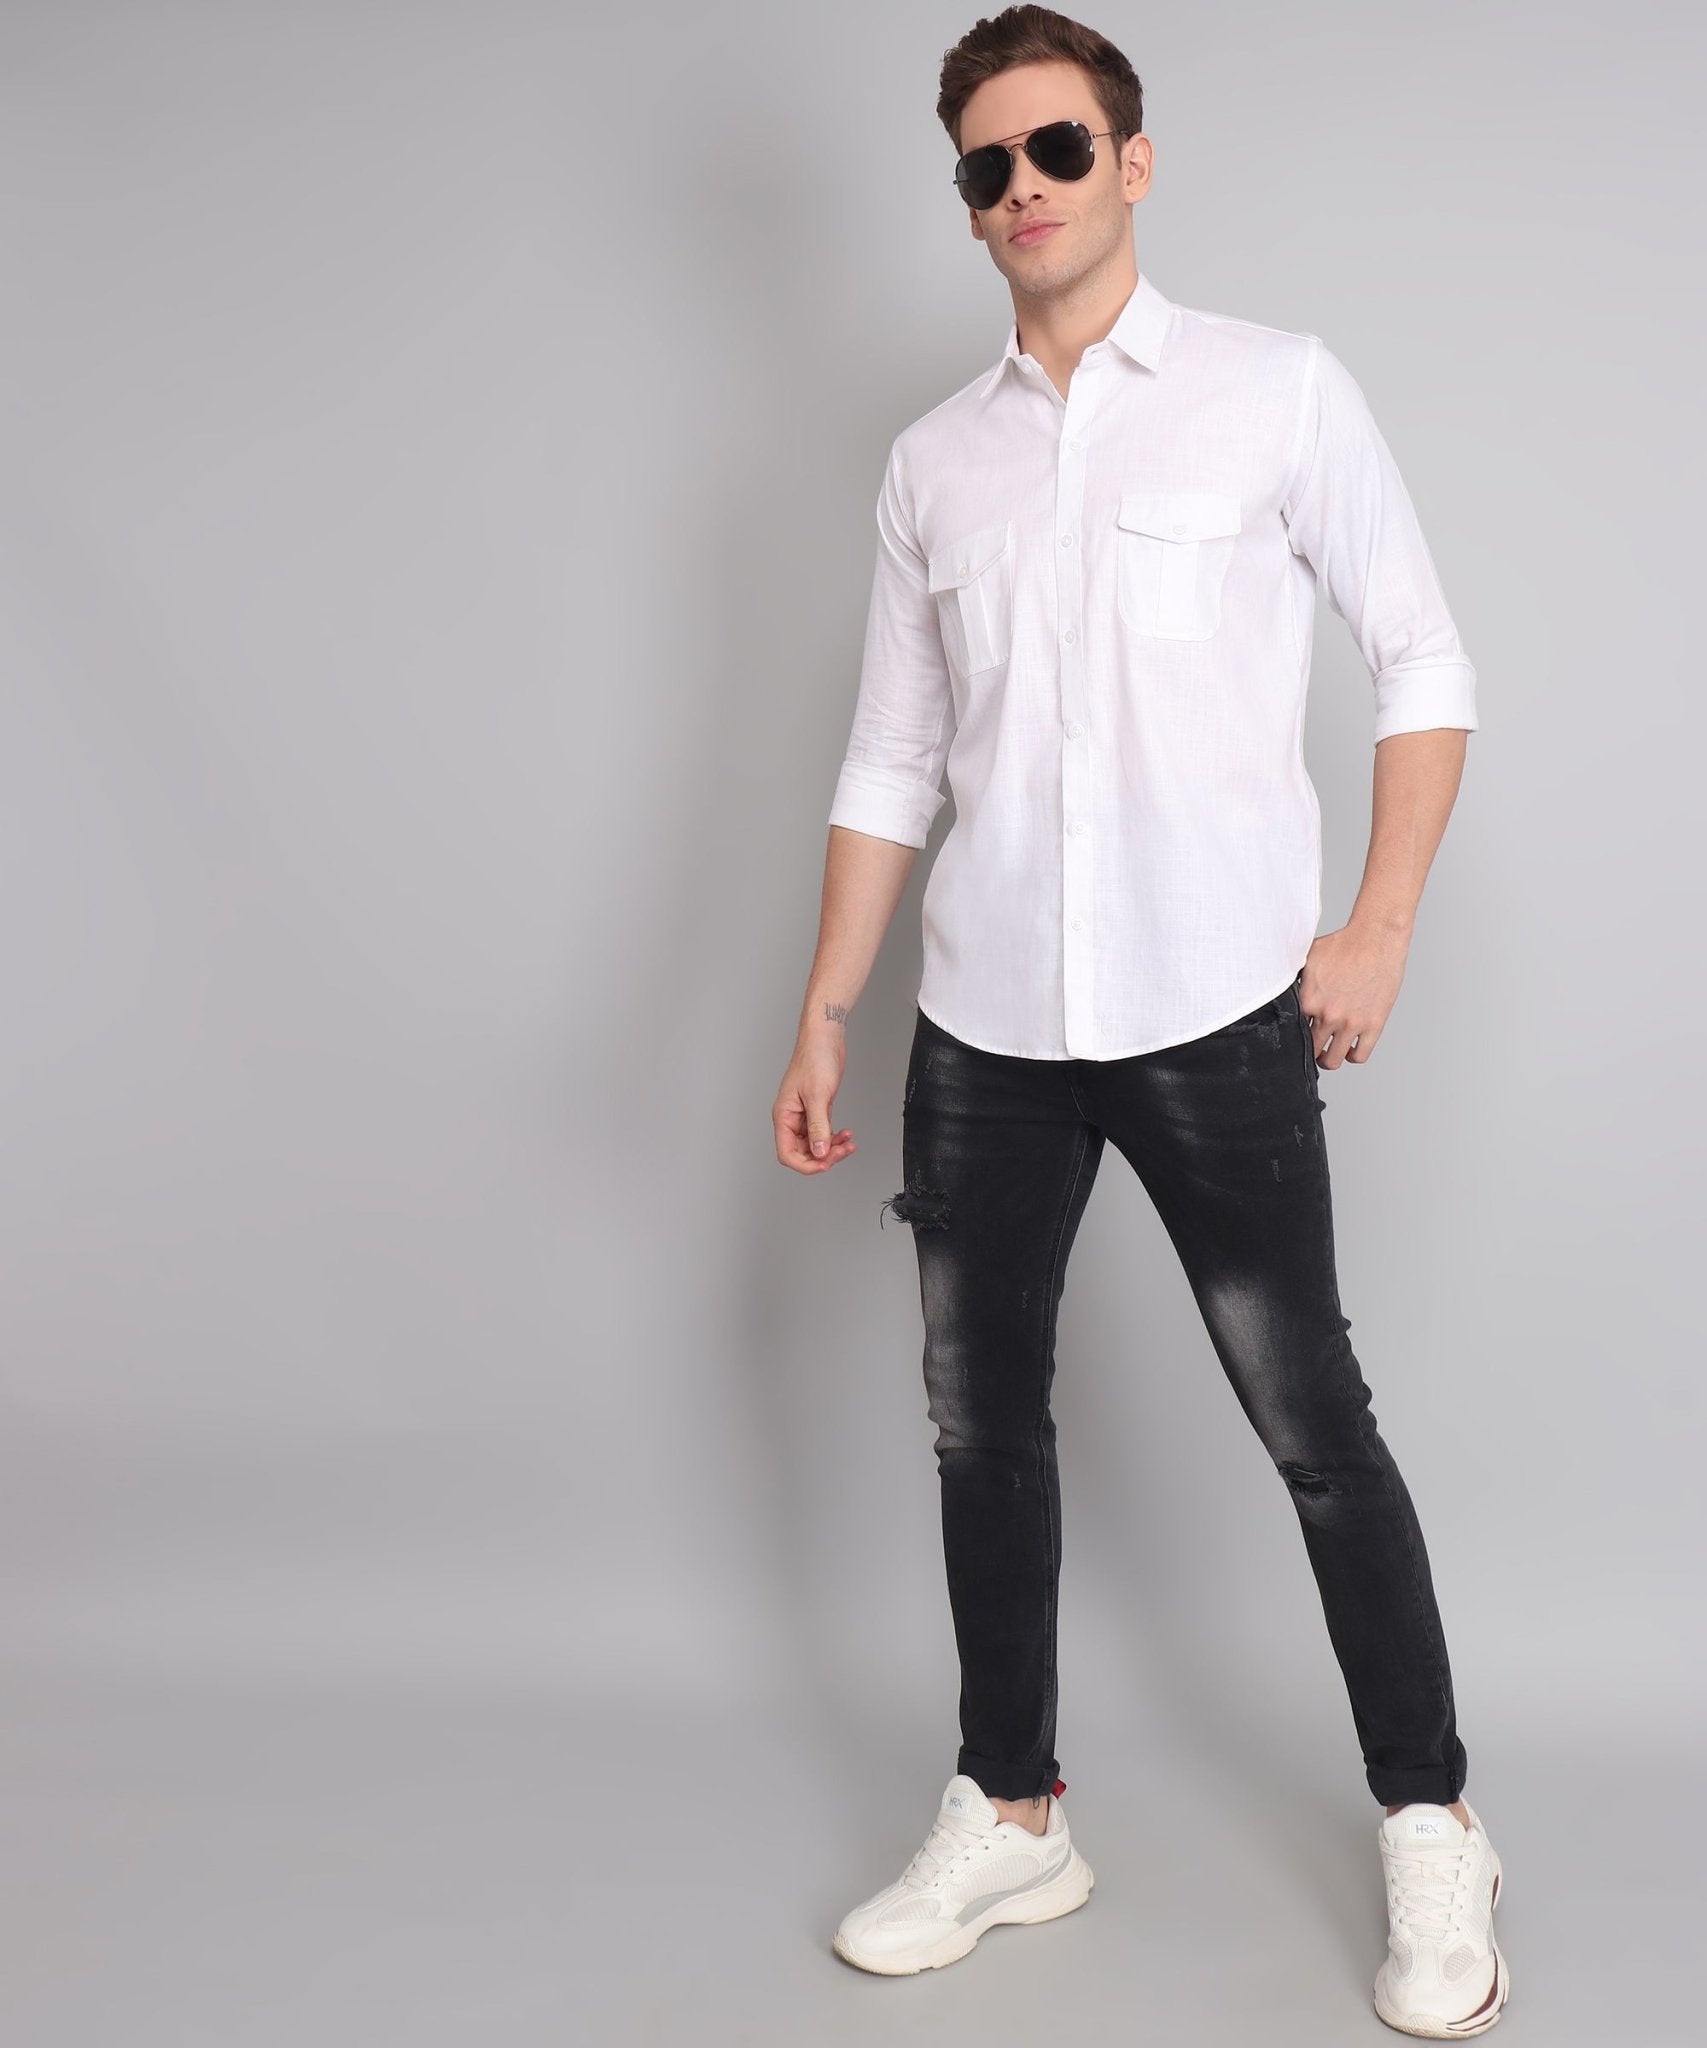 How to Find Best Linen Shirts in USA ? - TryBuy® USA🇺🇸